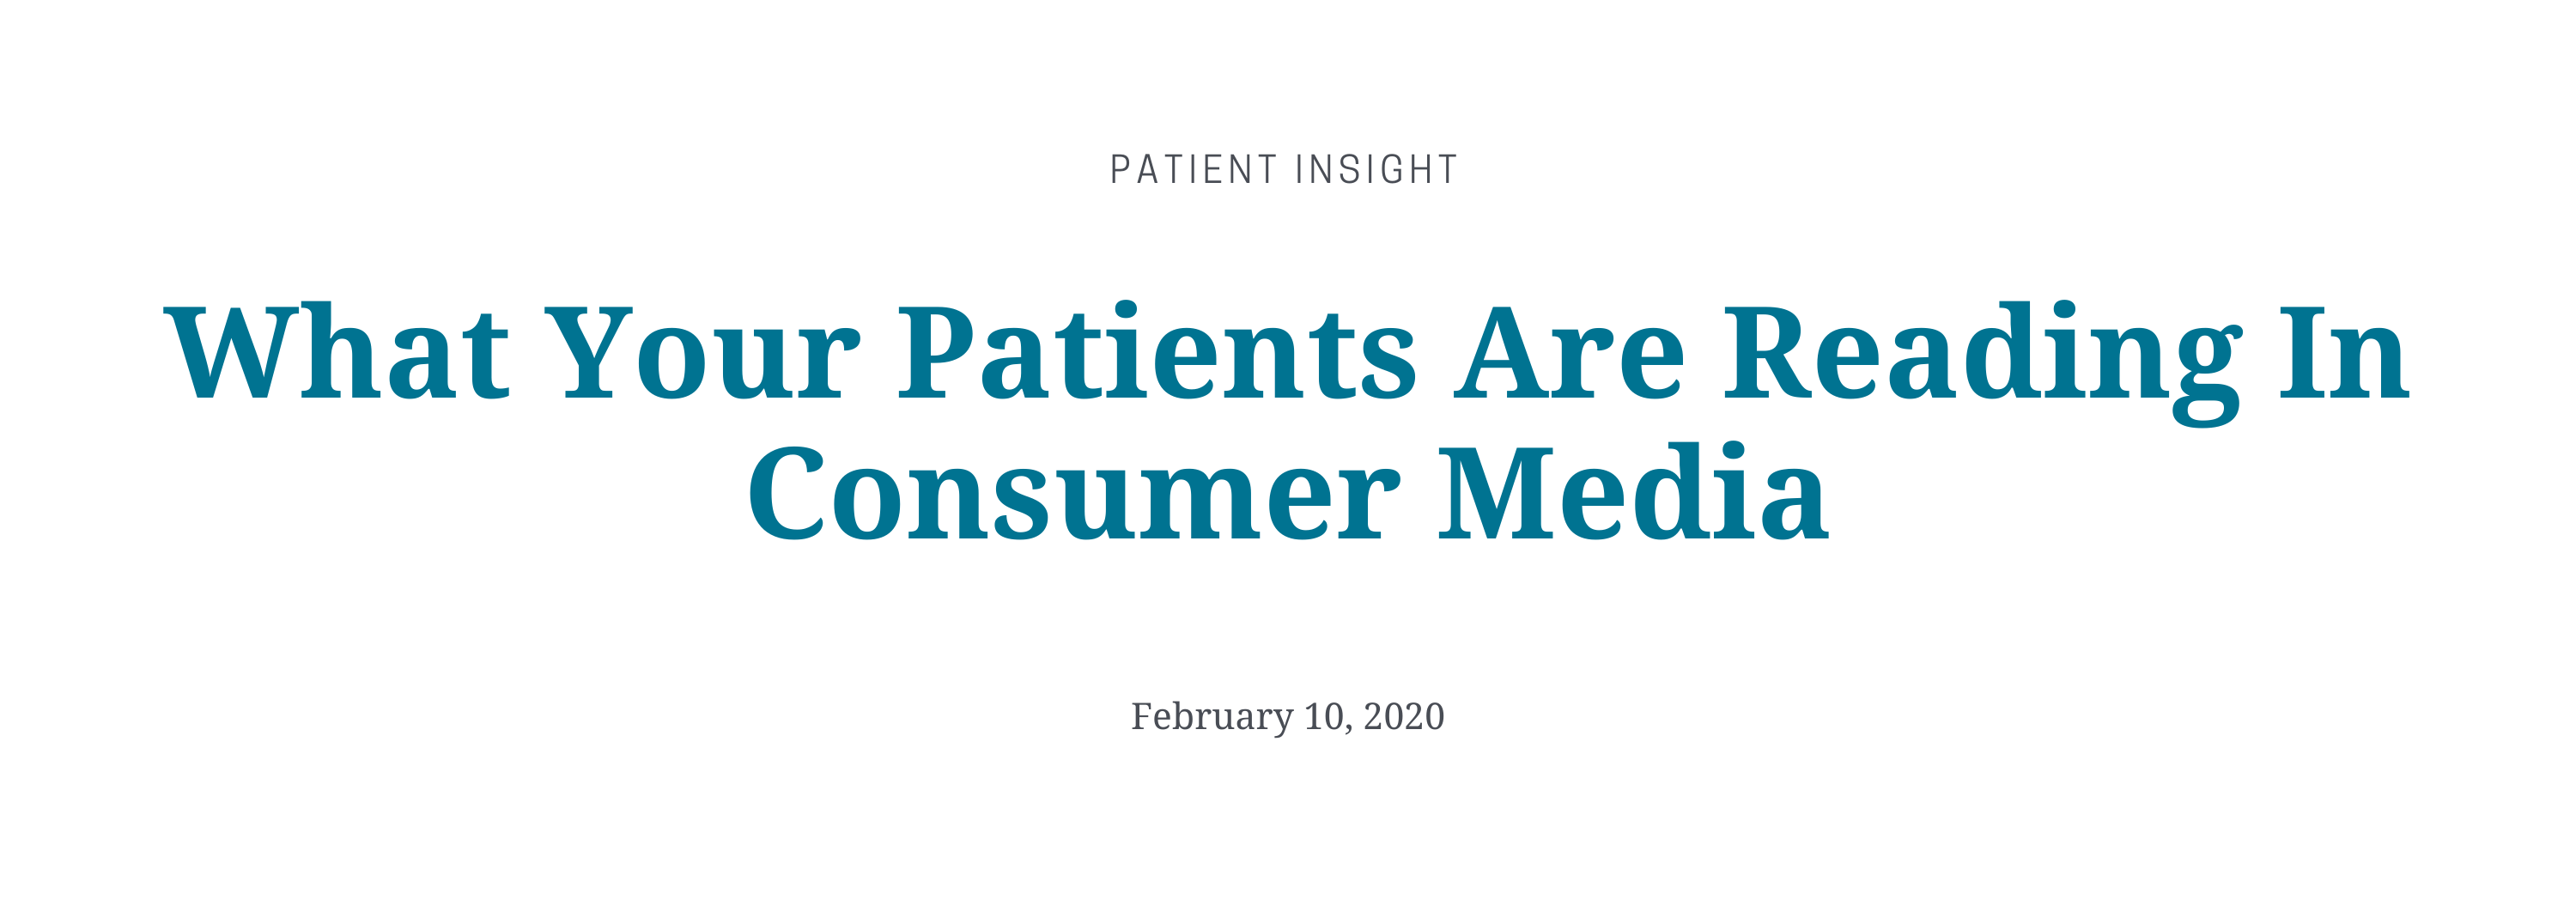 What your patients are reading in consumer media